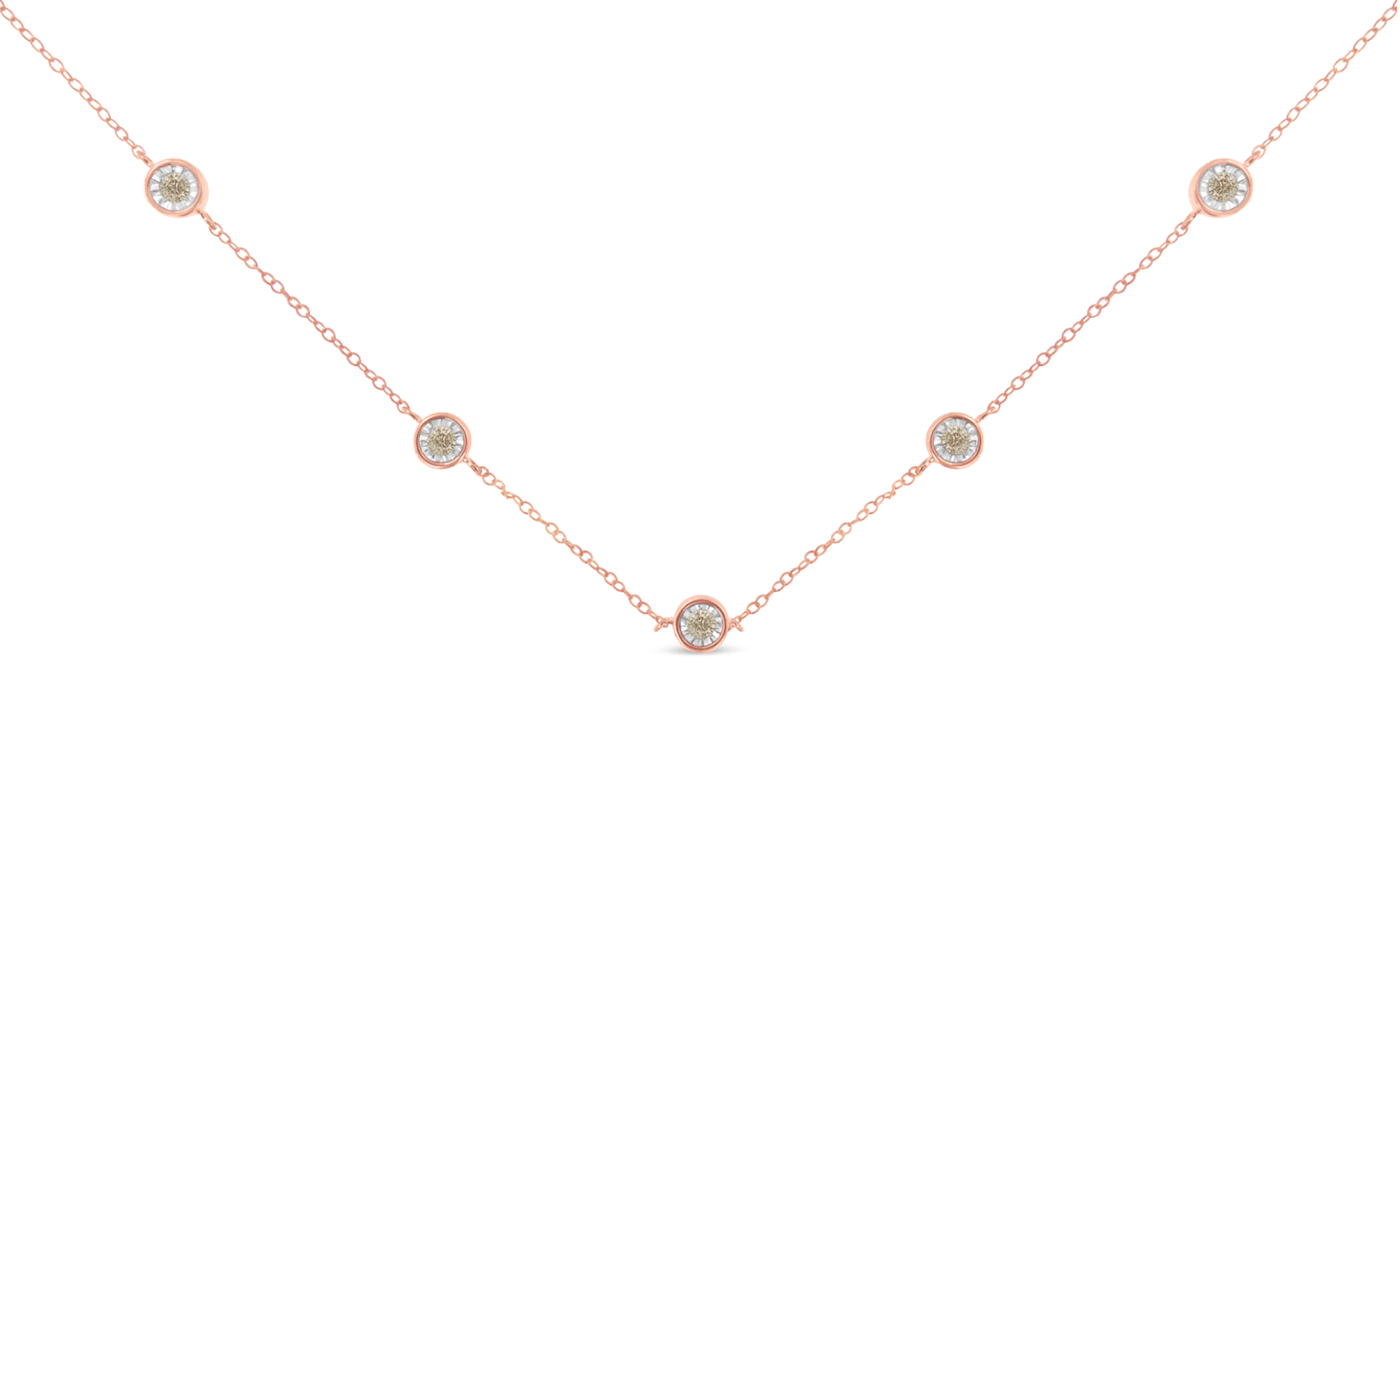 Carolina Herrera Pearl, Coral & Multistone Double Wrap Station Necklace -  Gold-Tone Metal Station, Necklaces - CAO51429